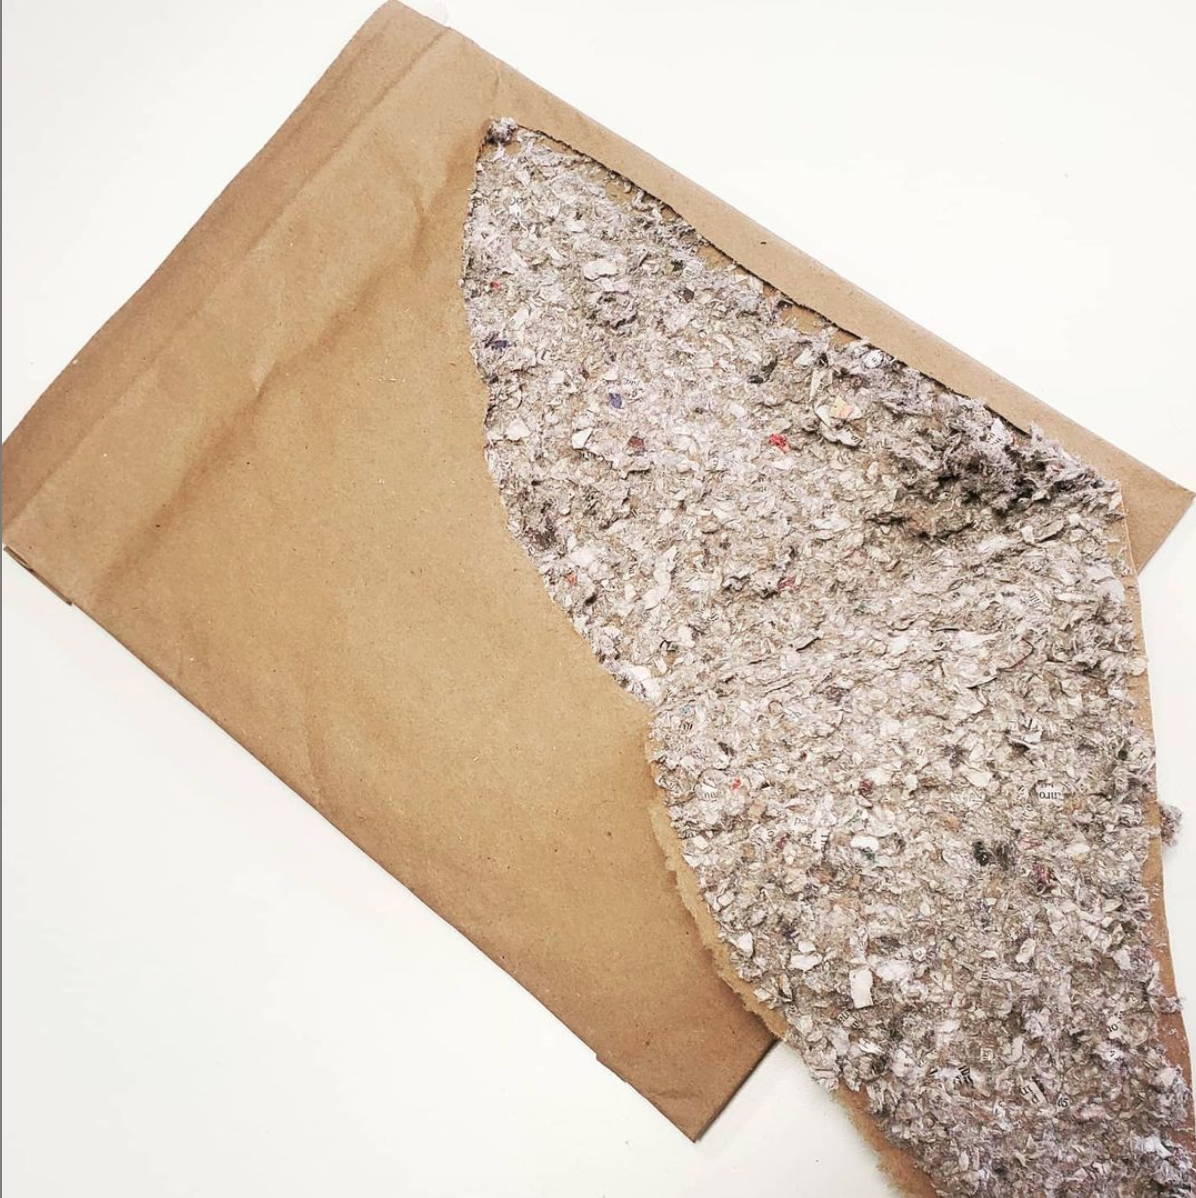 Photo of inside of packaging exposing padded lining made of recycled paper.